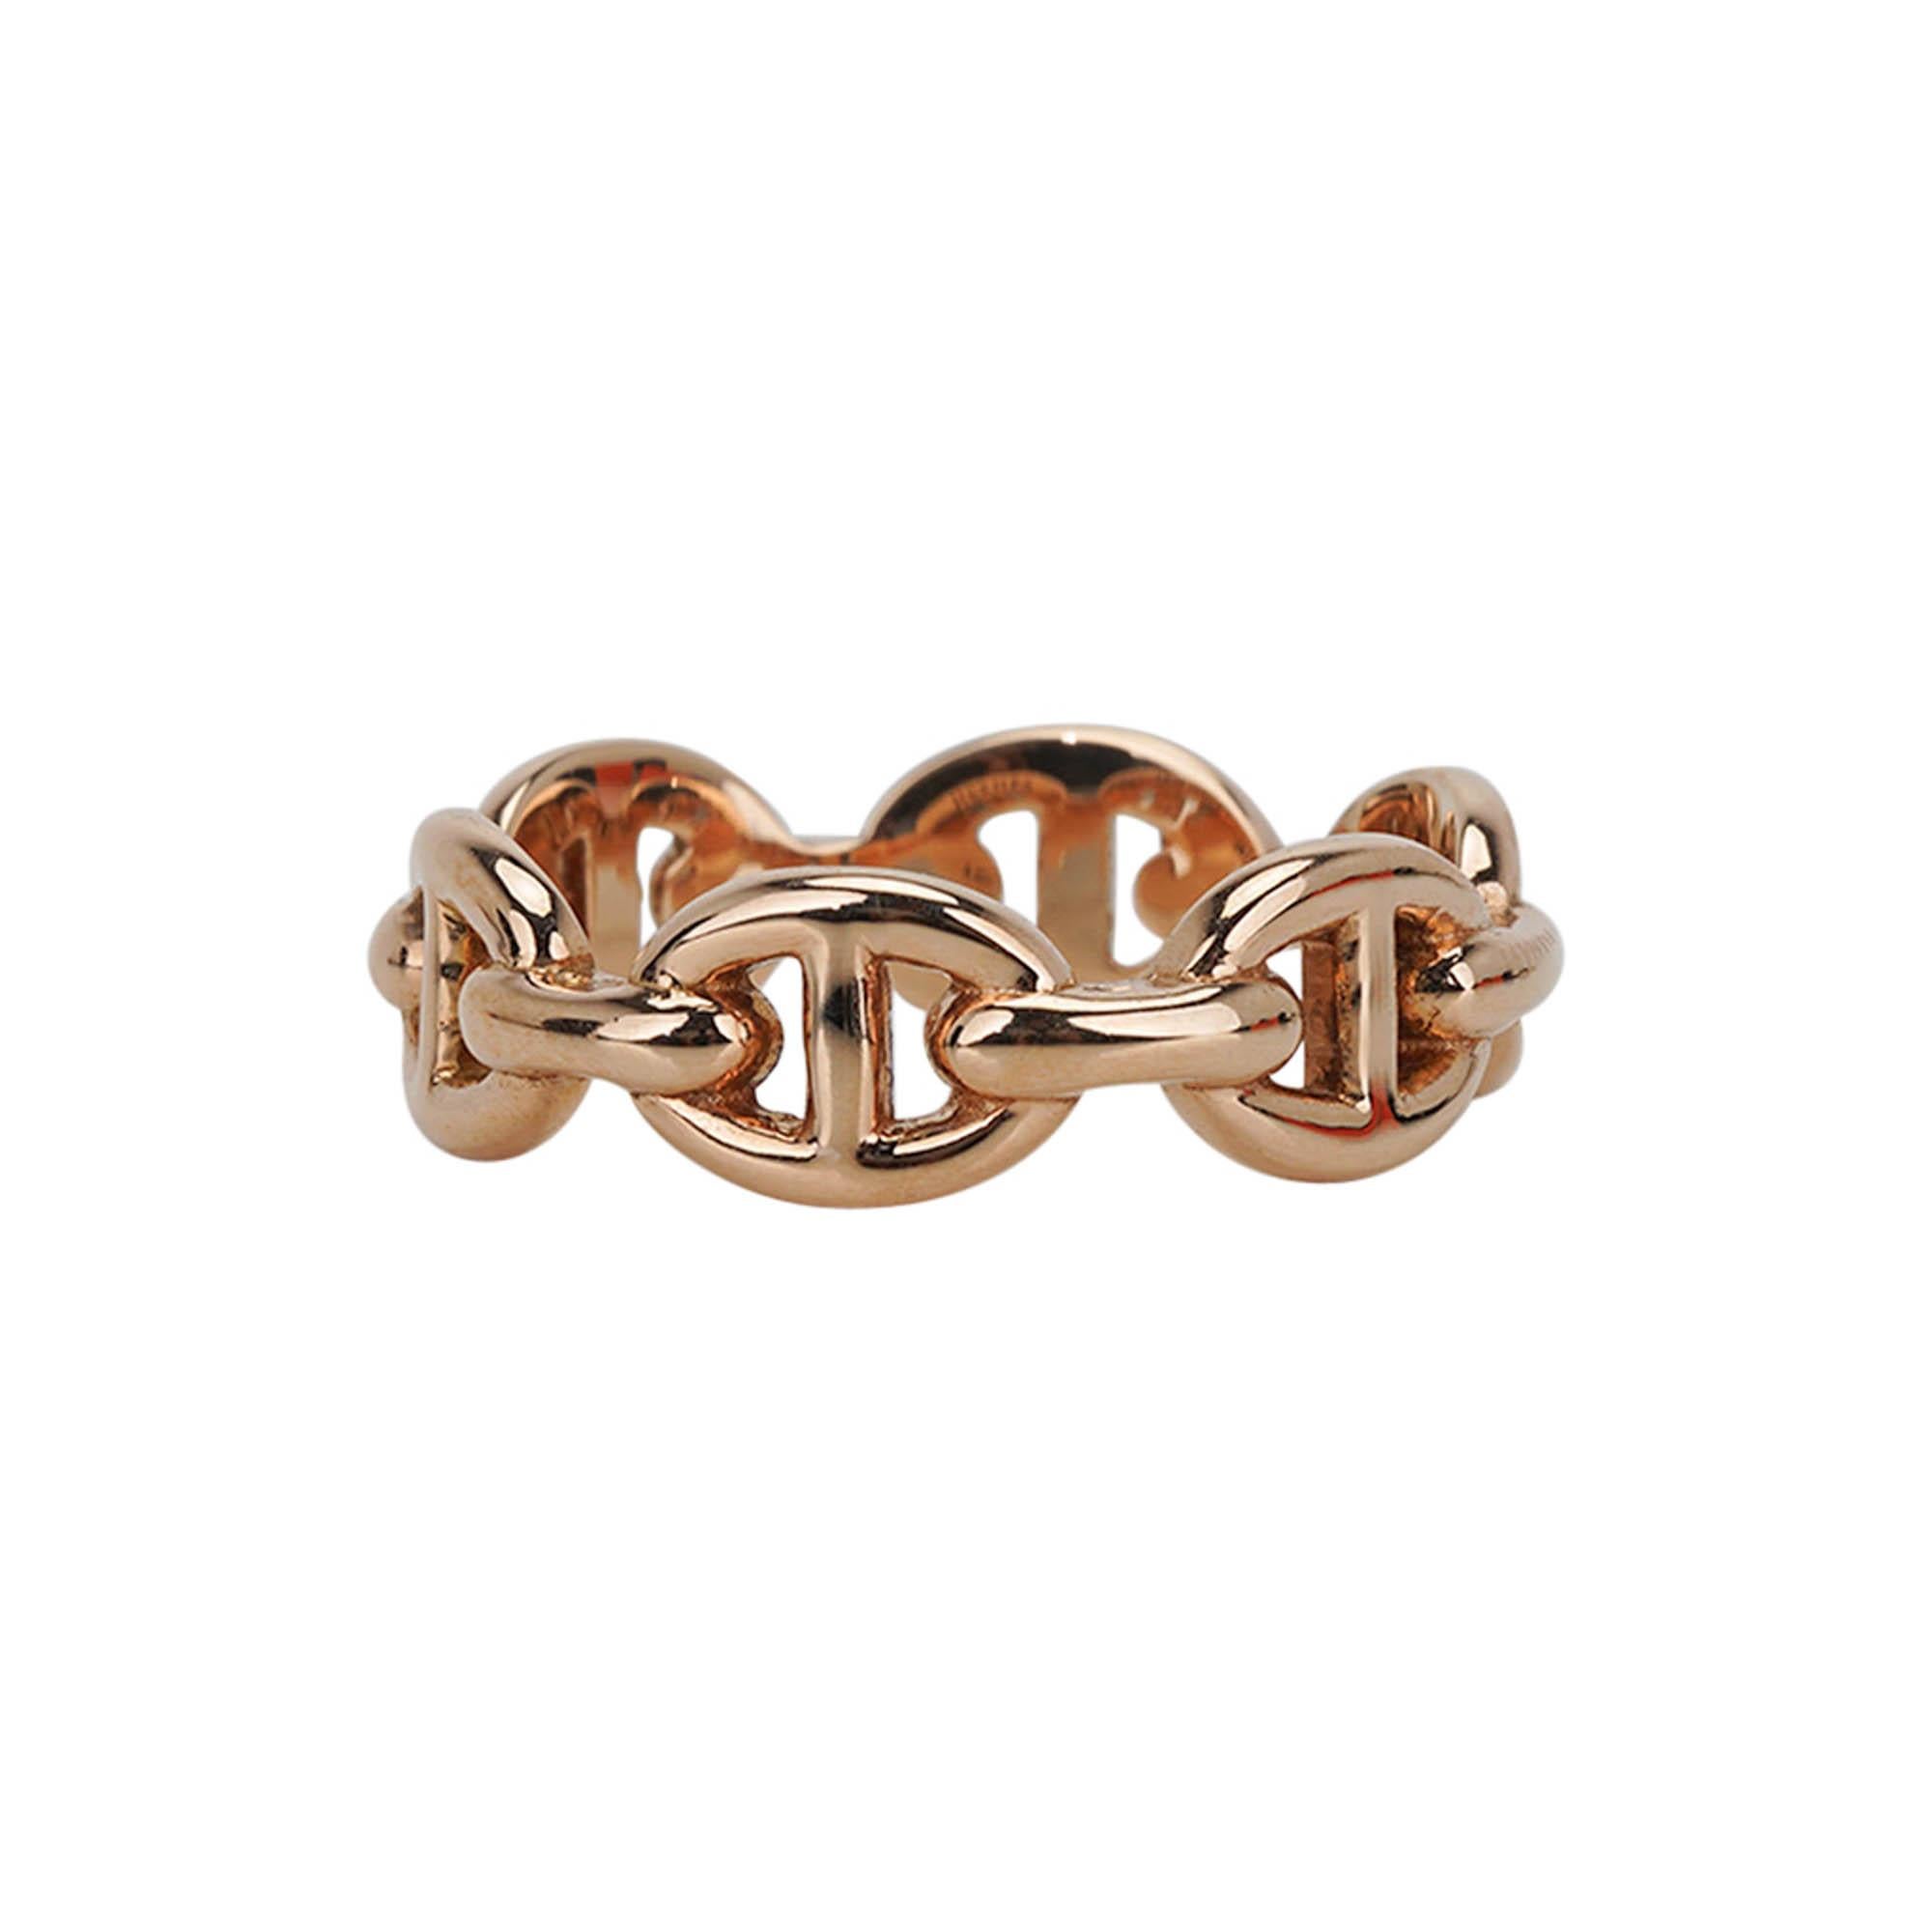 Mightychic offers an Hermes Chaine d'Ancre Enchainee ring featured in 18k Rose Gold.
The small model for everyday wear and chic simplicity.
A beautiful and timeless piece.
NEW or NEVER WORN.
final sale

SIZE 51

RING WIDTH
0.23